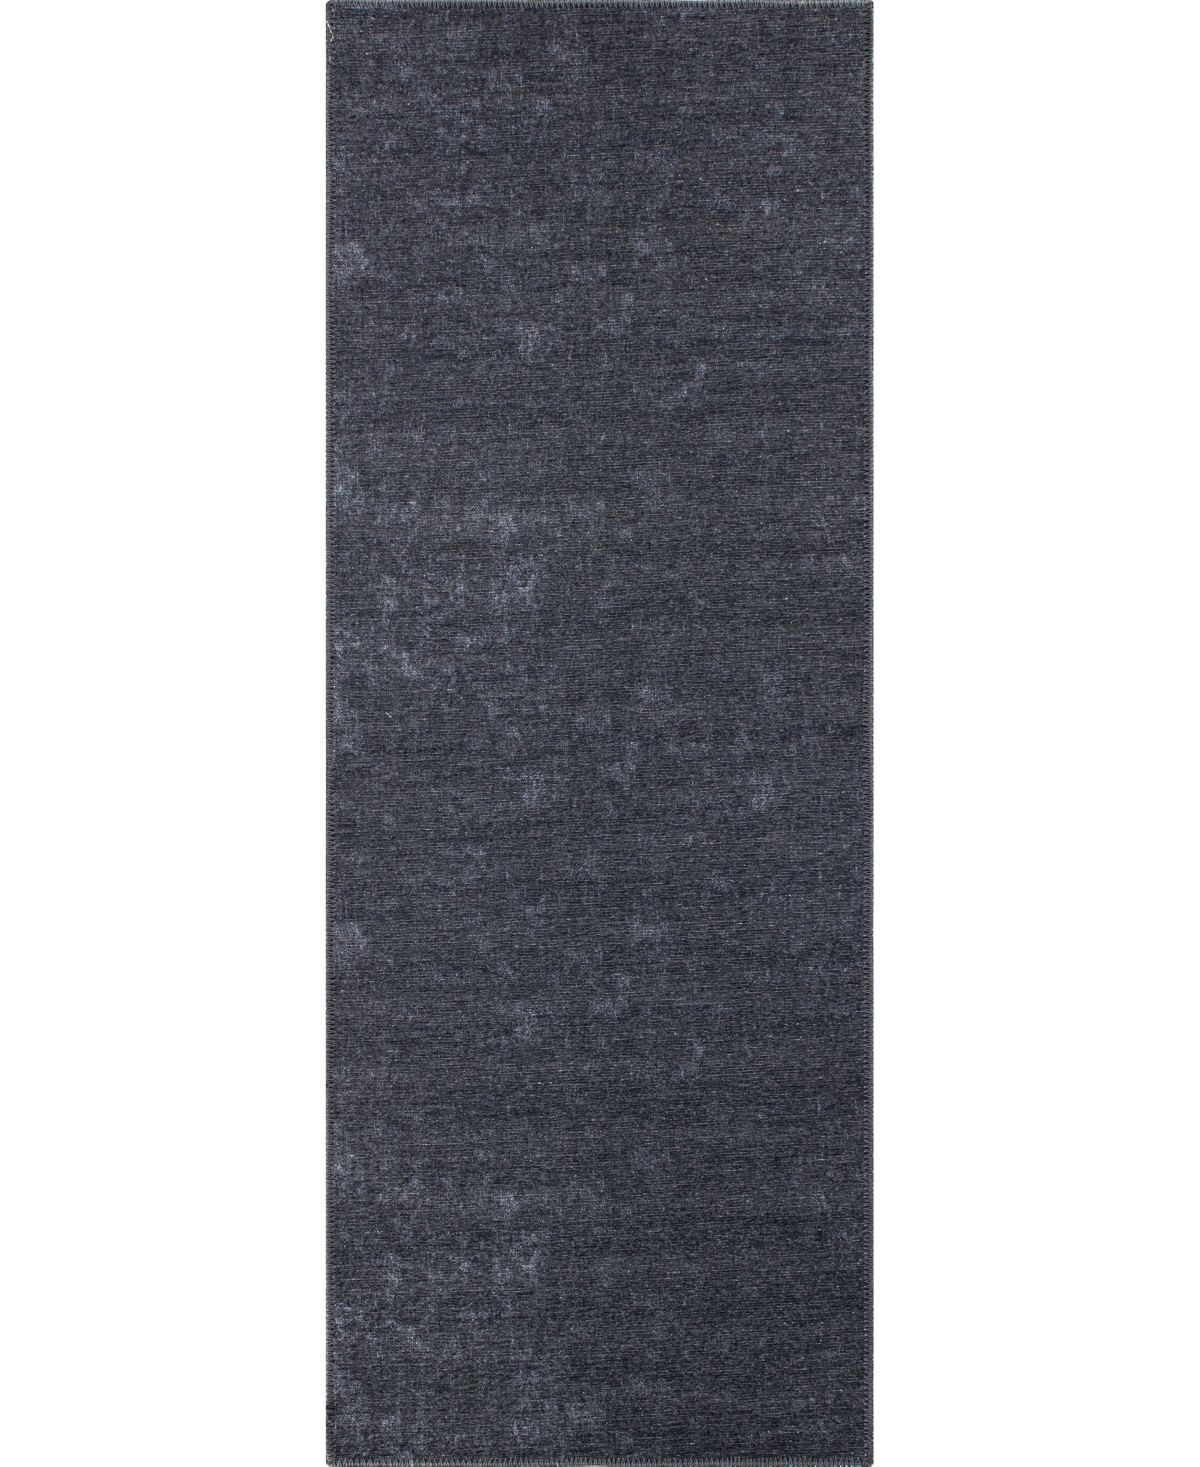 Main Street Rugs Lecco 5084 2'6" X 10' Runner Area Rug In Charcoal